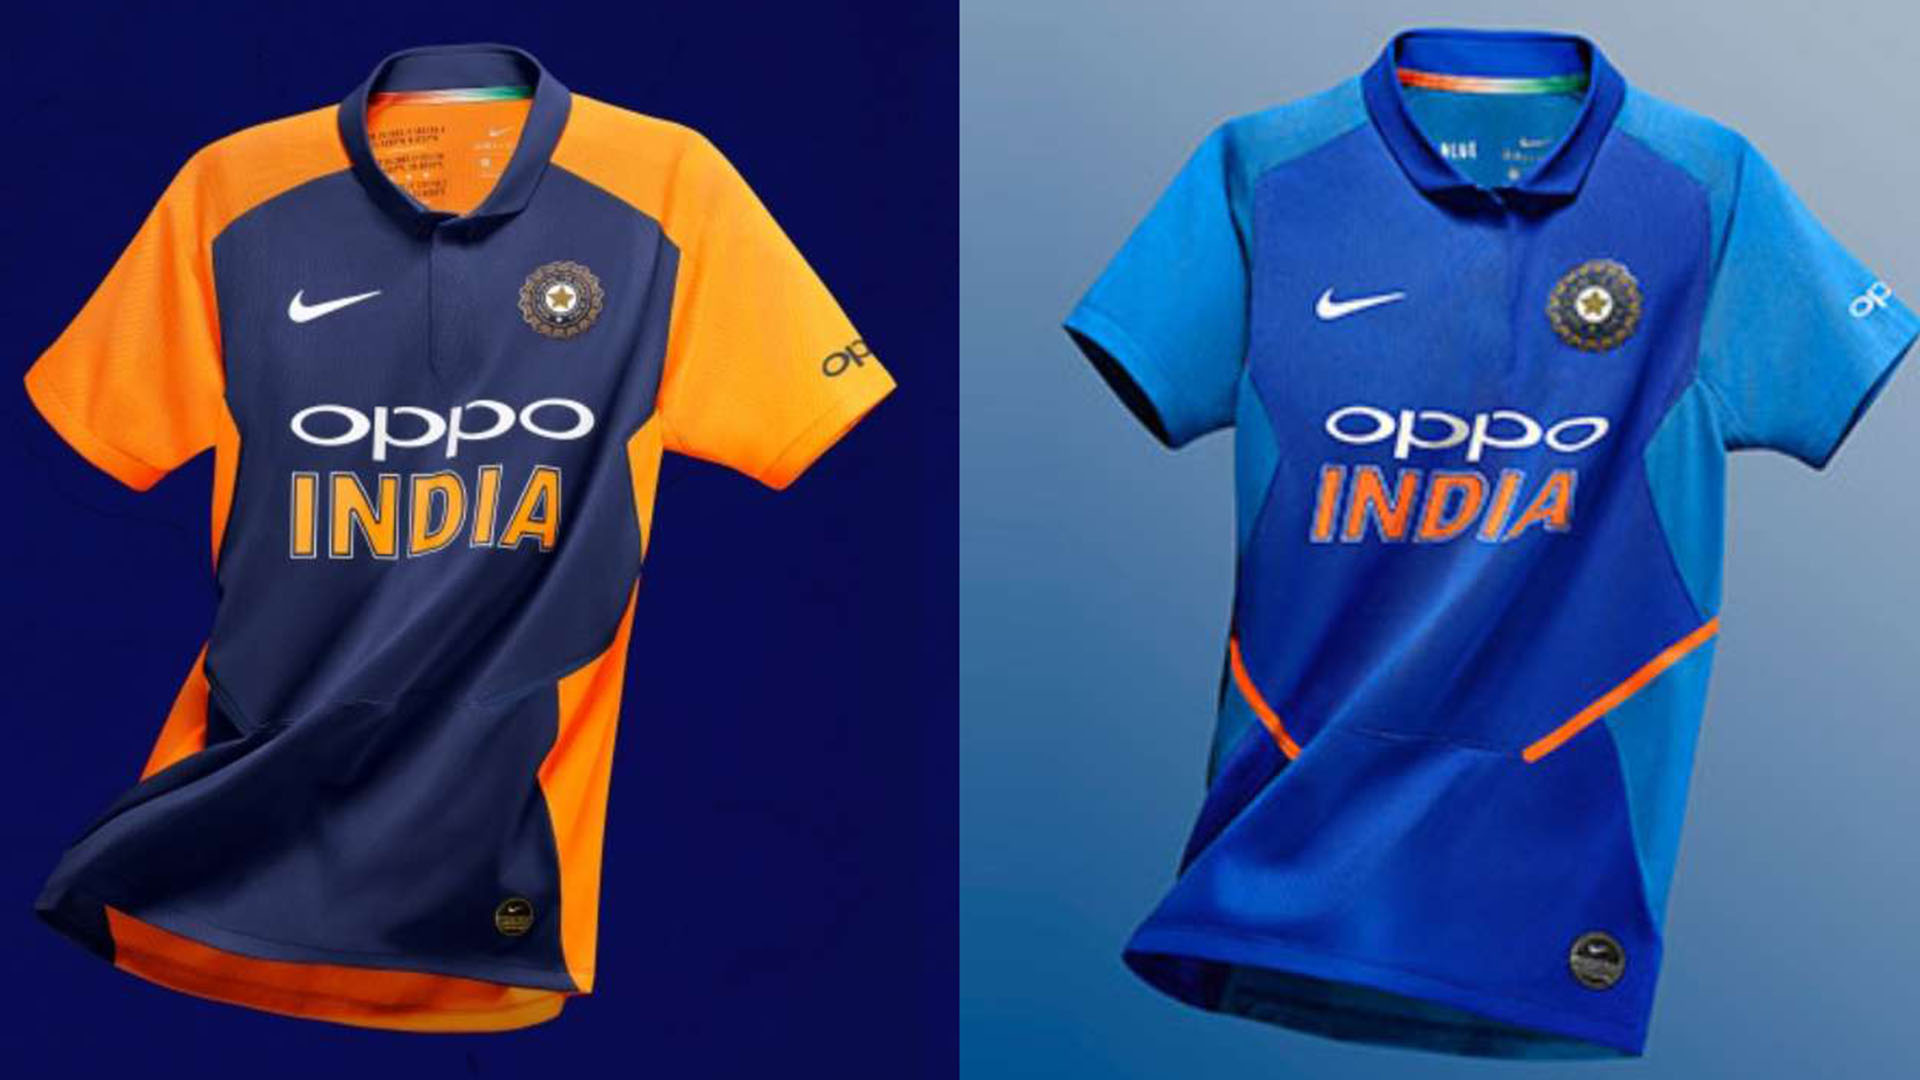 Team india will no more be sponsored by Nike